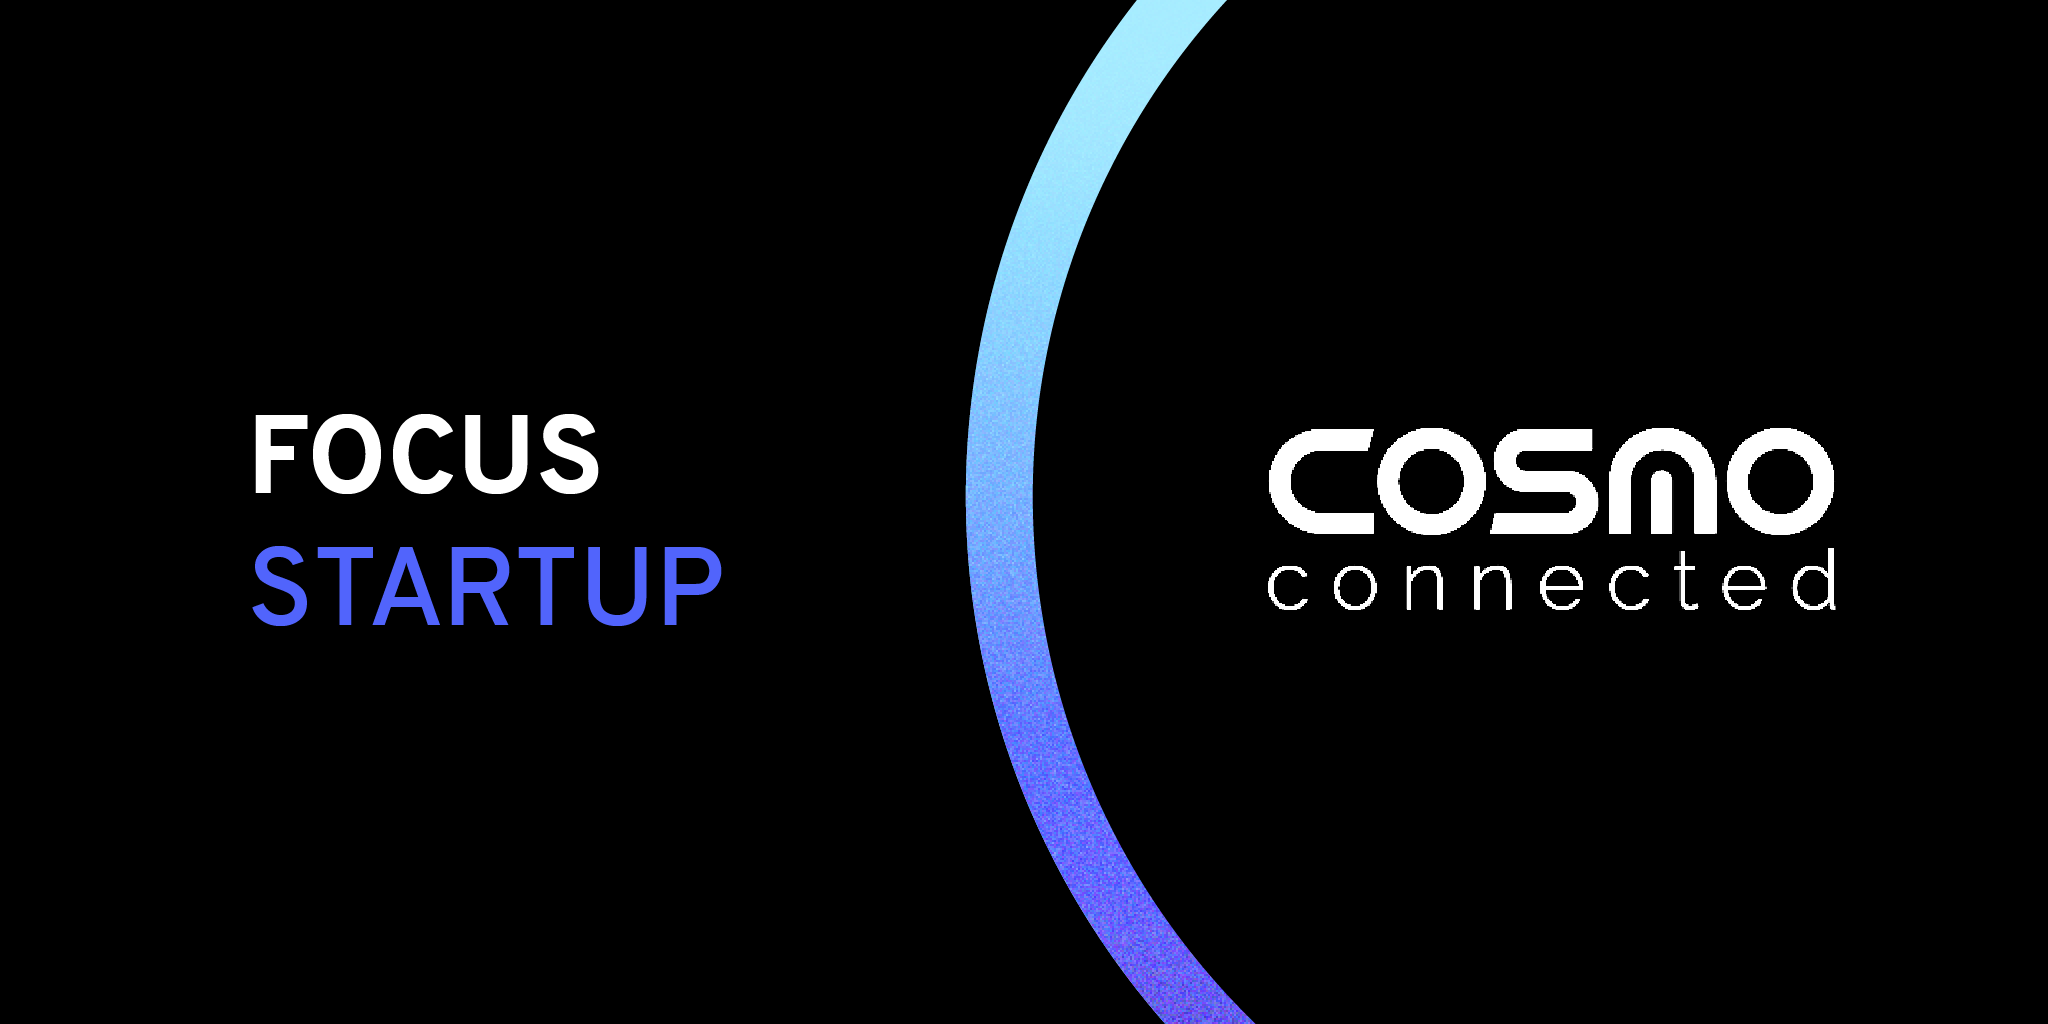 focus-startup-cosmo-connected (2)